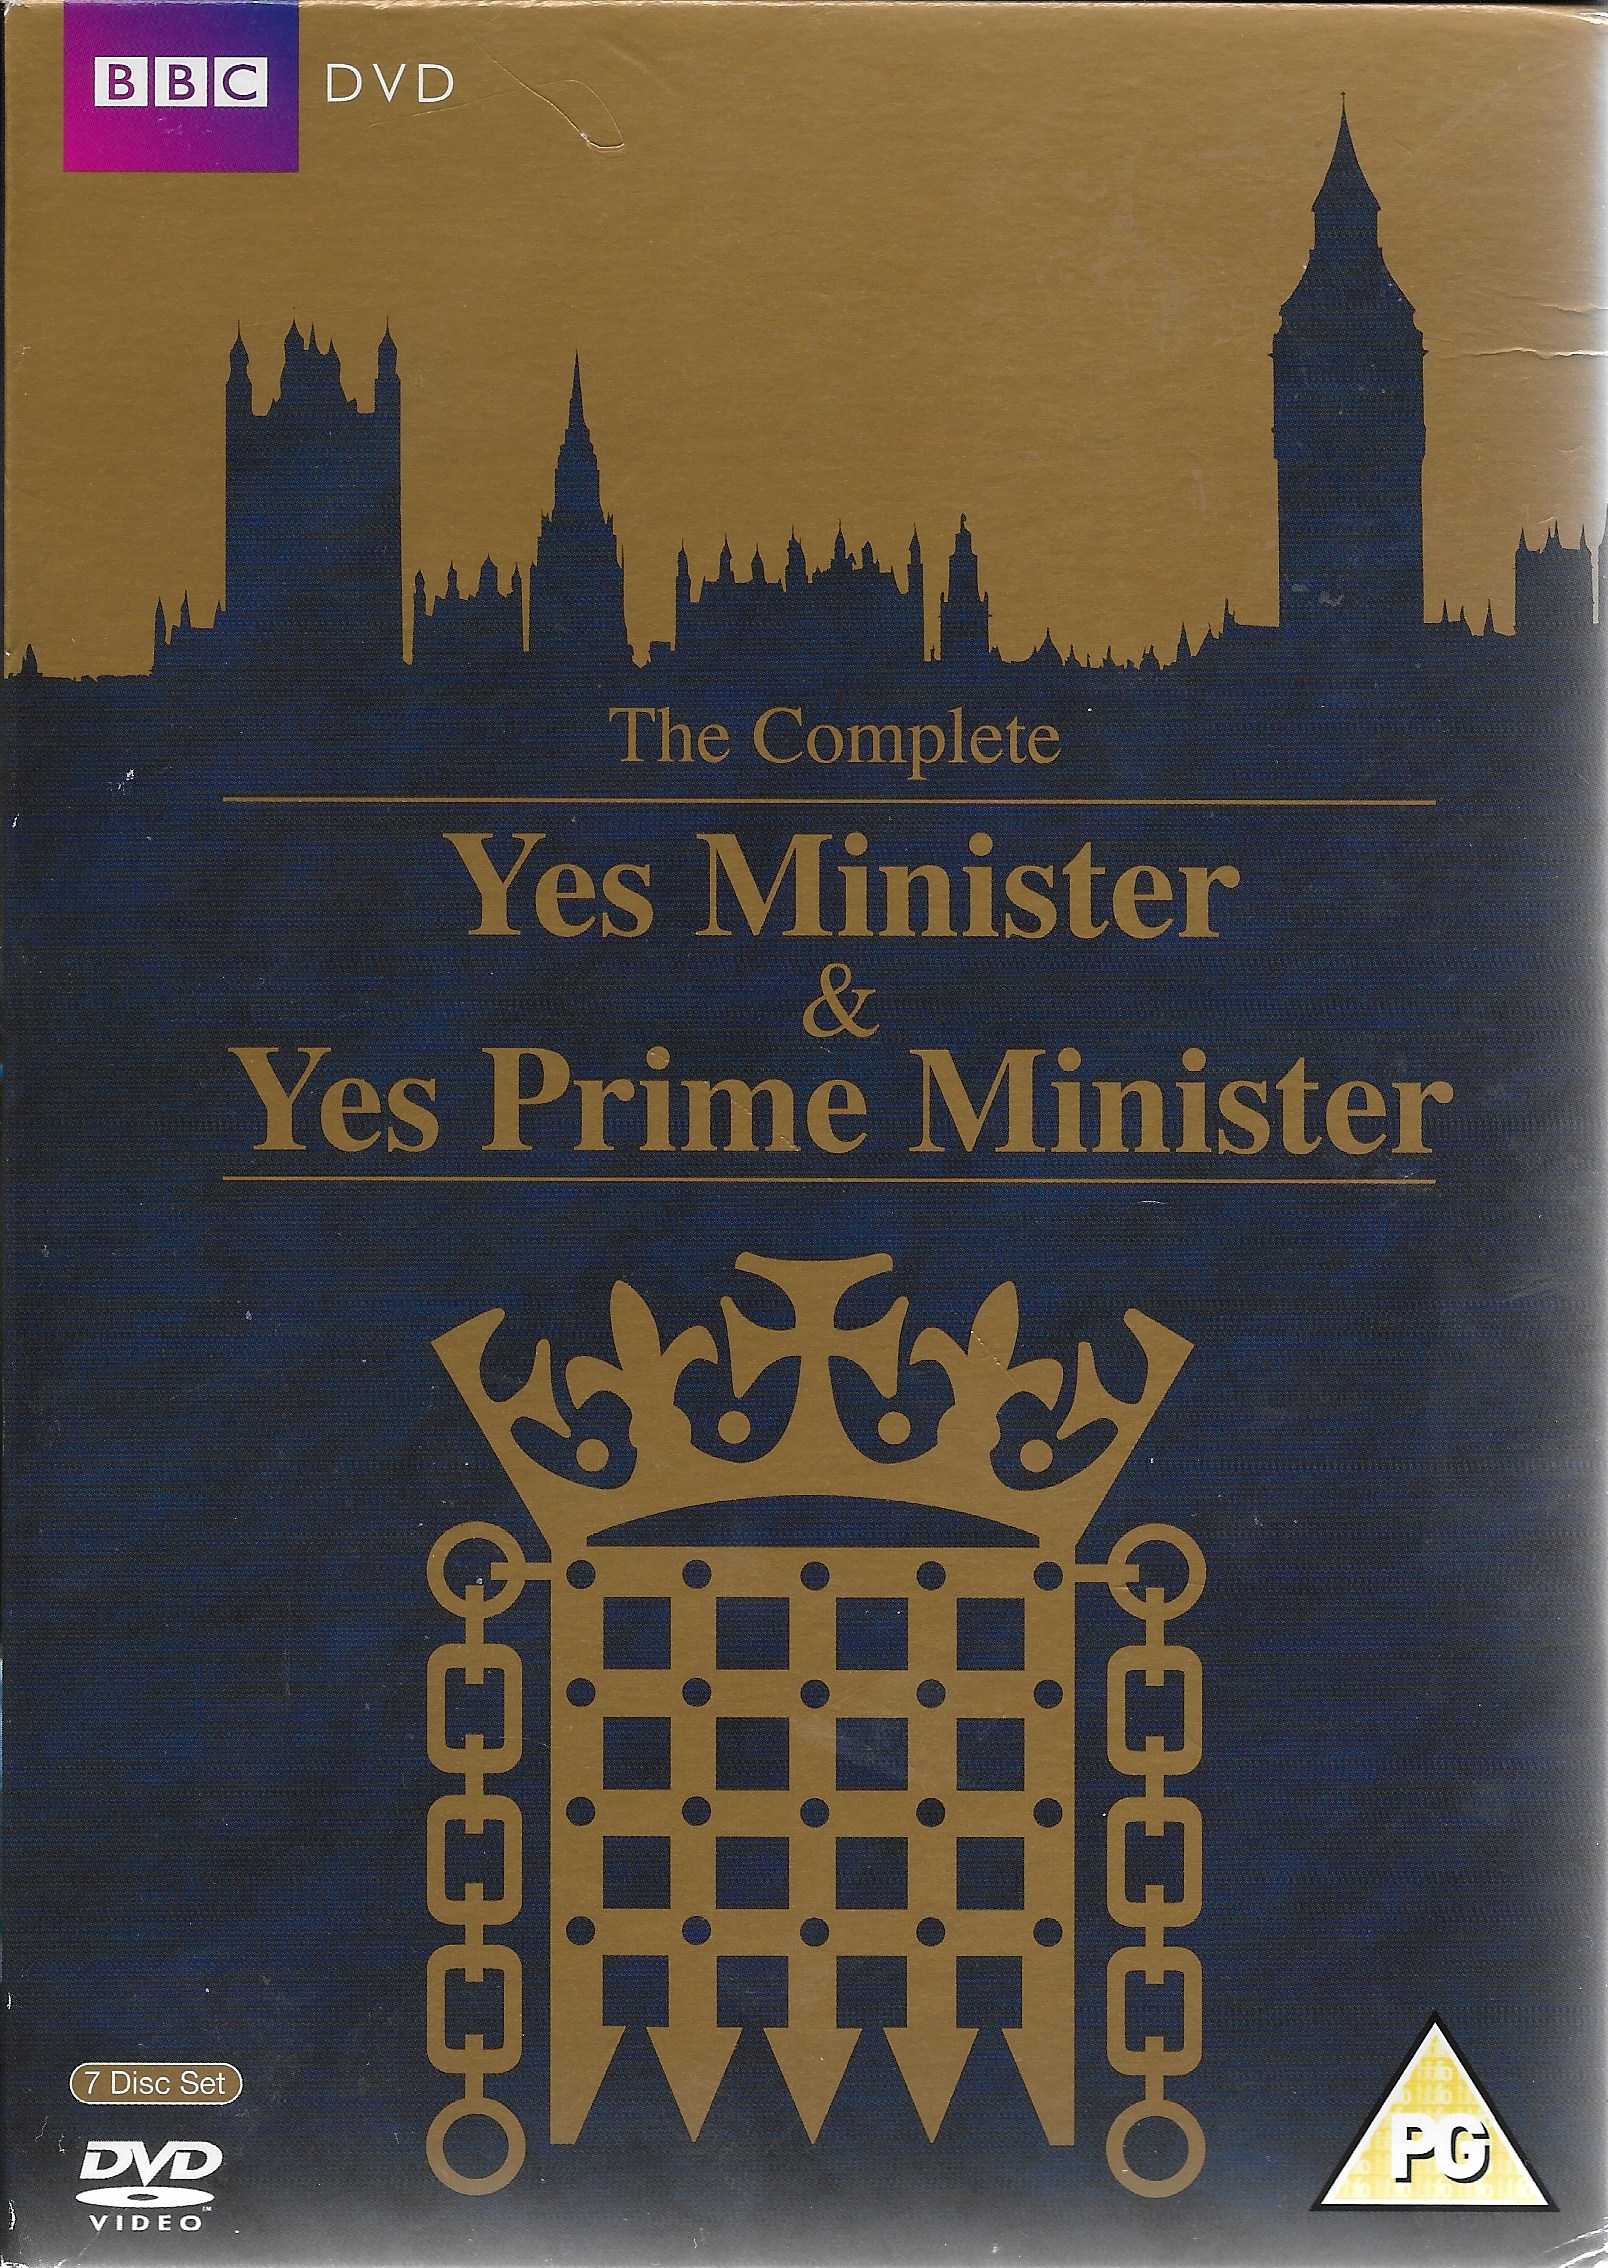 Picture of BBCDVD 2113 The complete Yes Minister & Yes, Prime Minister by artist Antony Jay / Jonathan Lynn from the BBC dvds - Records and Tapes library